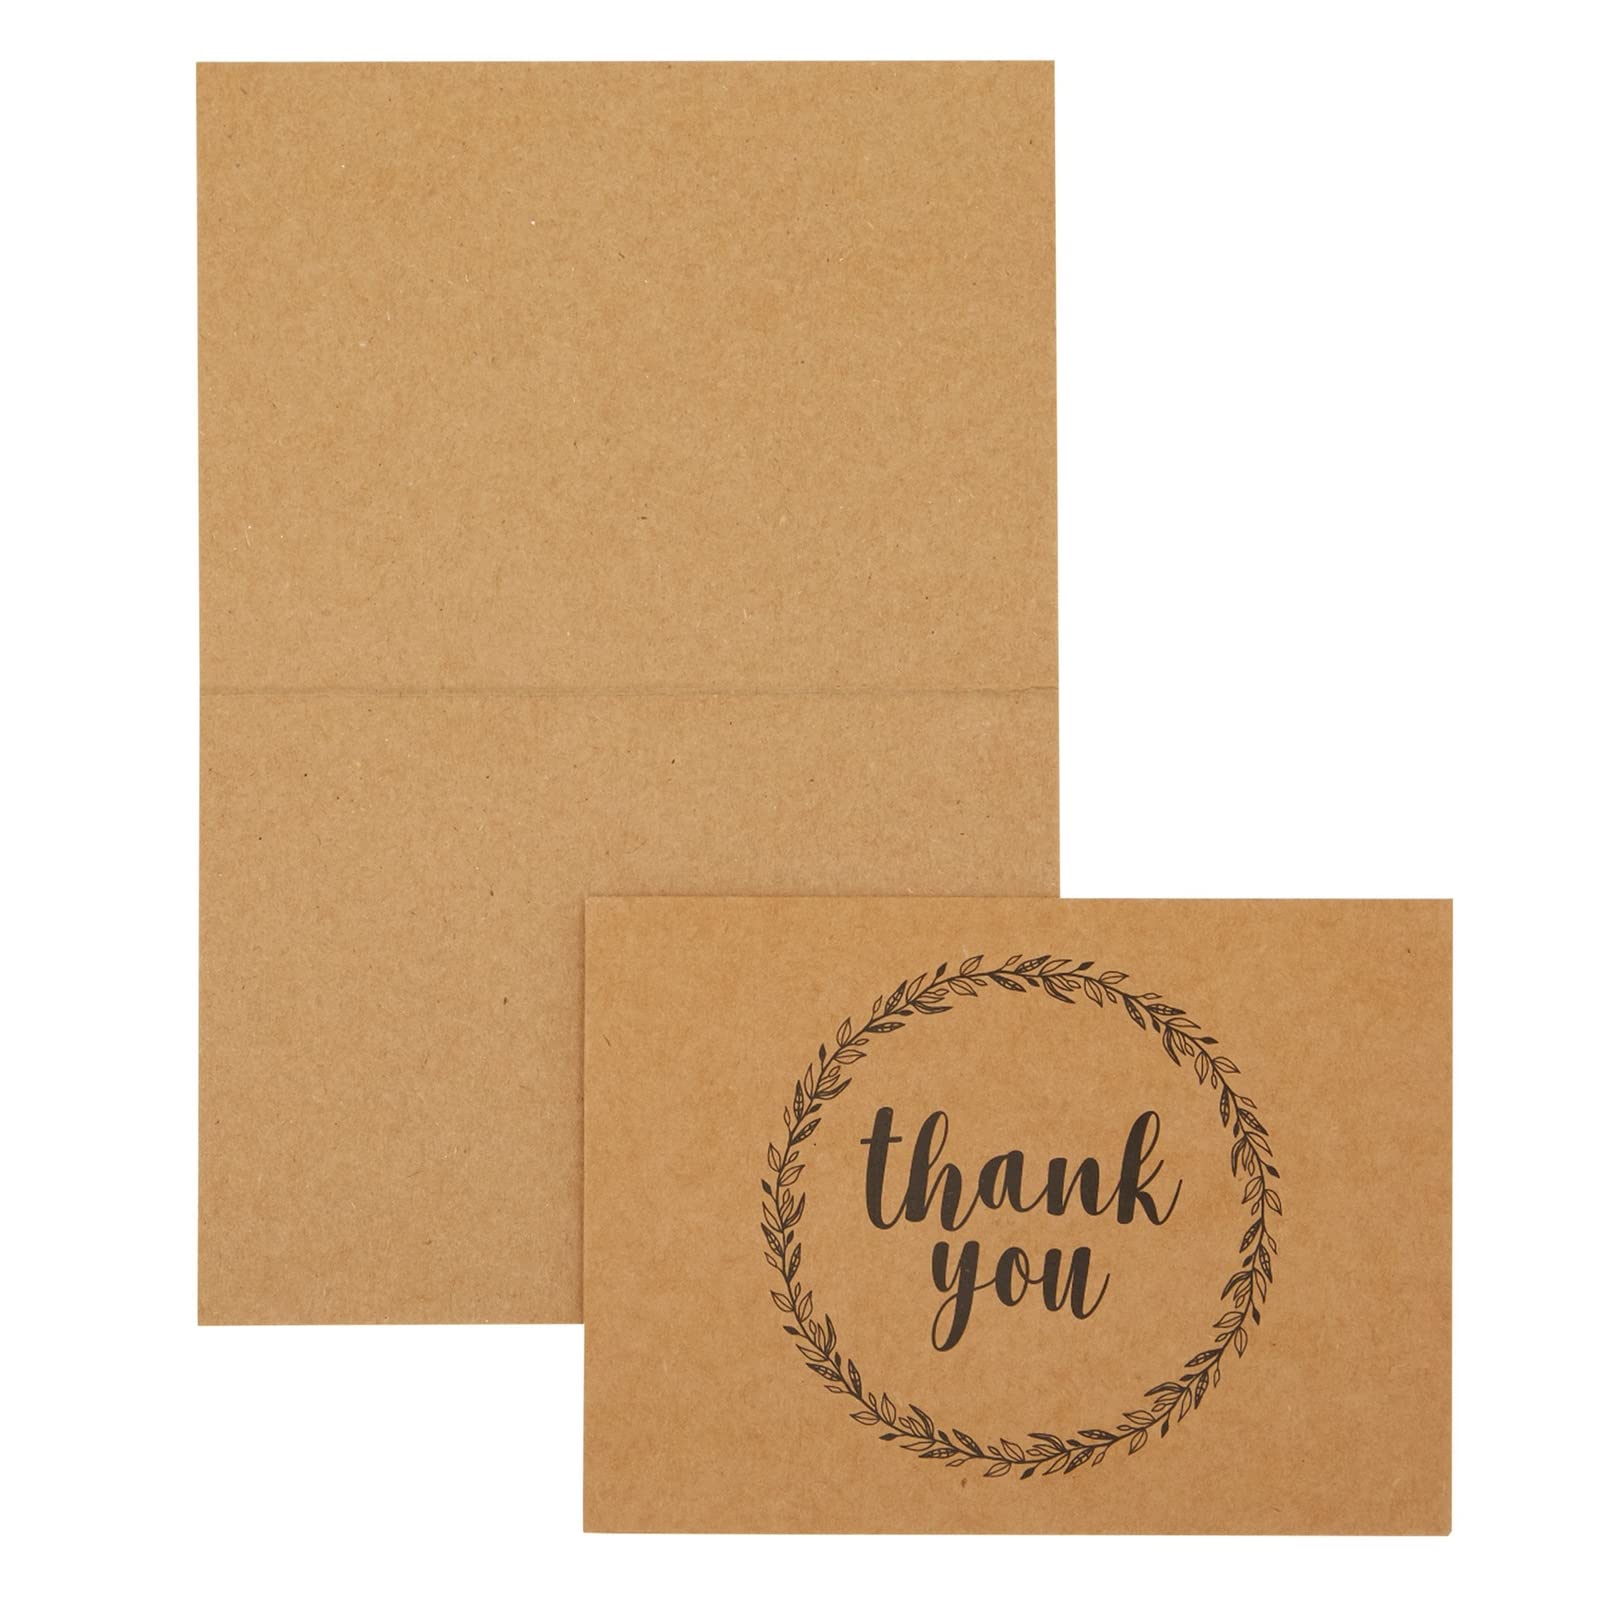 Best Paper Greetings 120 Pack Bulk Thank You Cards with Envelopes, Blank Kraft Paper Notes with V-Flap Envelopes for Wedding, Graduation, Baby Shower, Business, Funeral, Birthday (3.5x5 in)